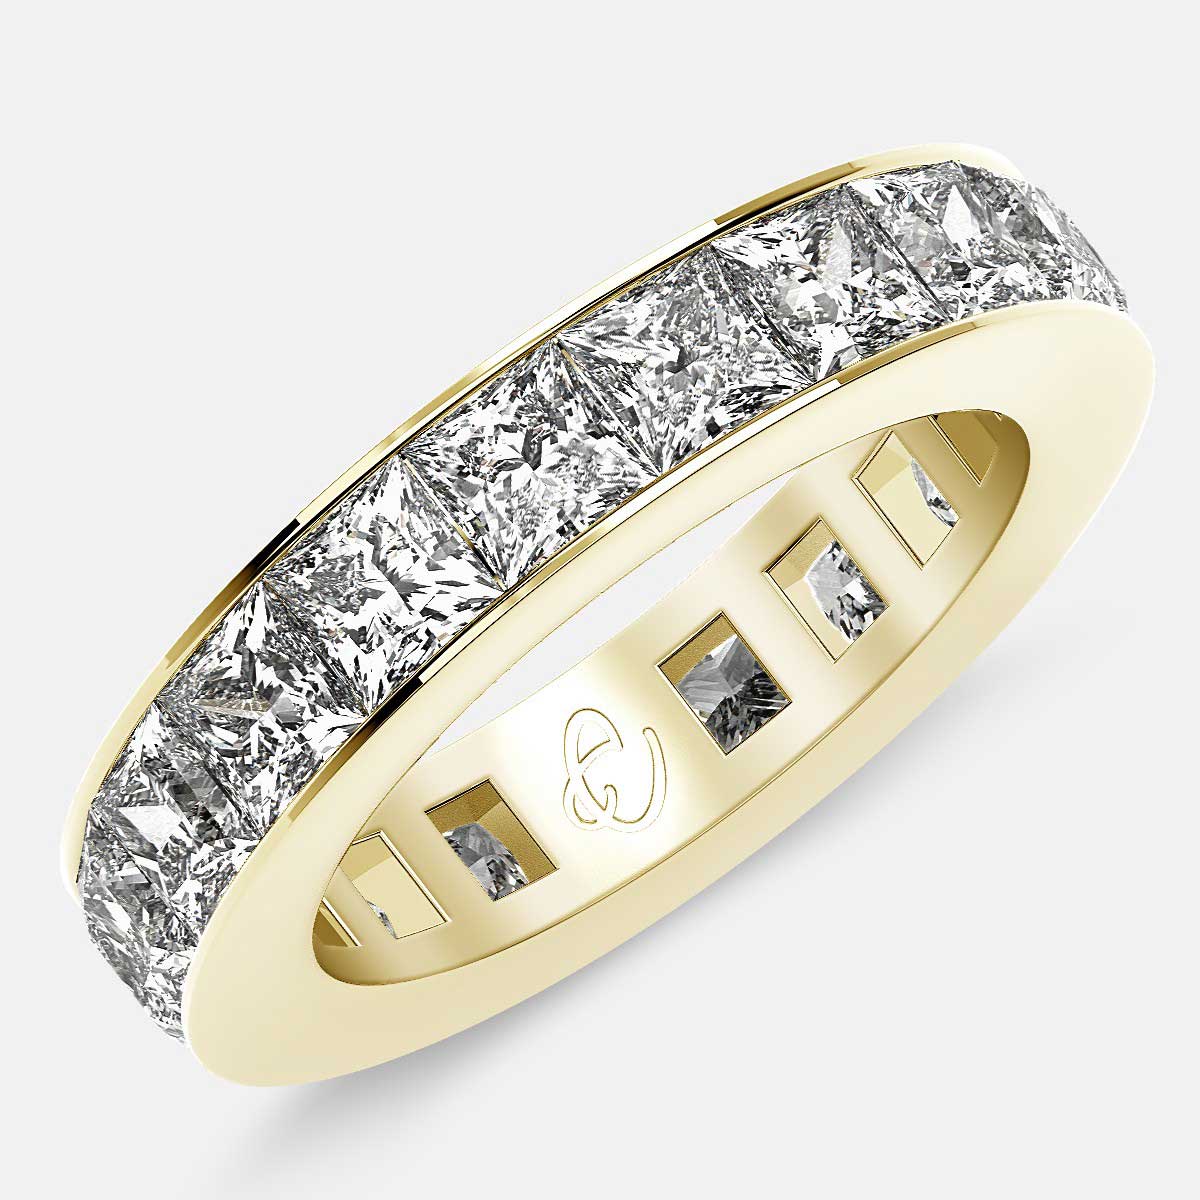 Eternity Ring with Channel Set Princess Cut Diamonds in 18k Yellow Gold